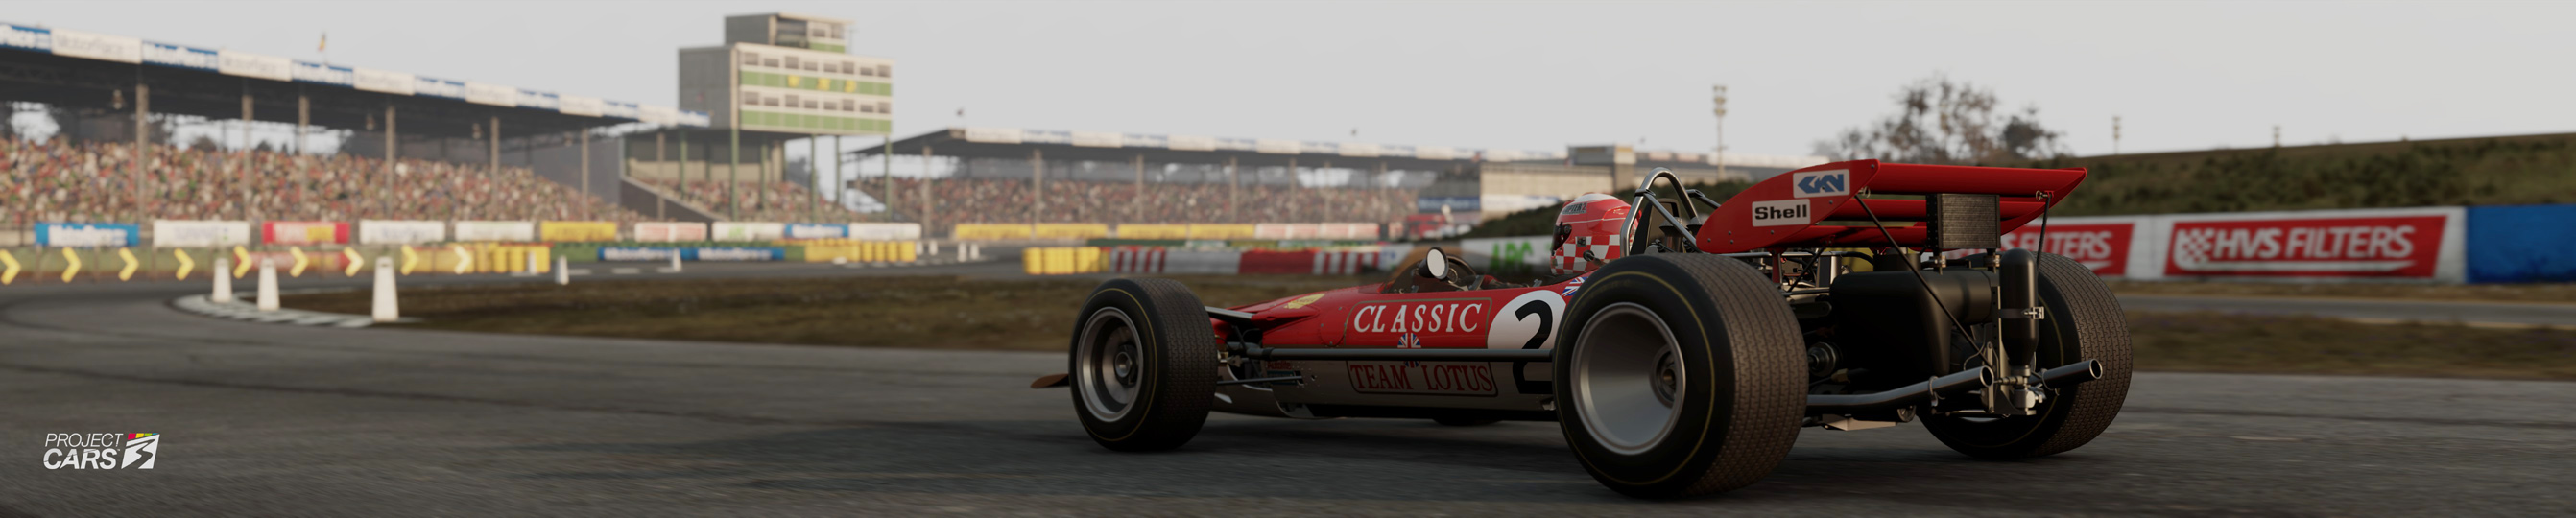 4 PROJECT CARS 3 LOTUS 49C at SILVERSTONE CLASSIC GP crop copy.jpg